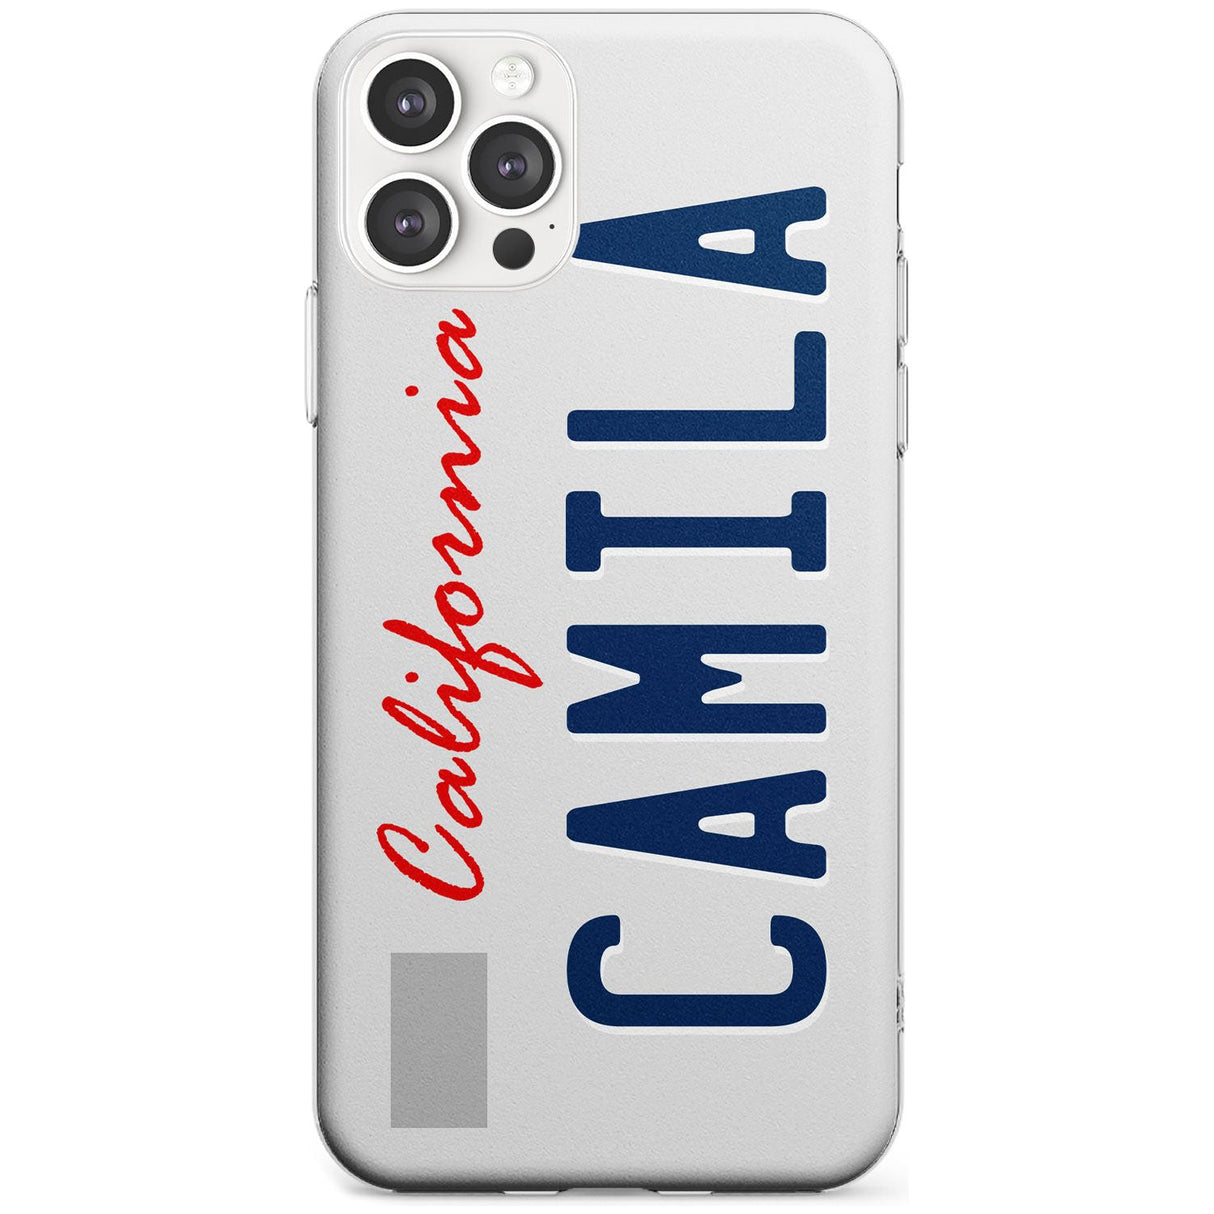 California License Plate Black Impact Phone Case for iPhone 11 Pro Max